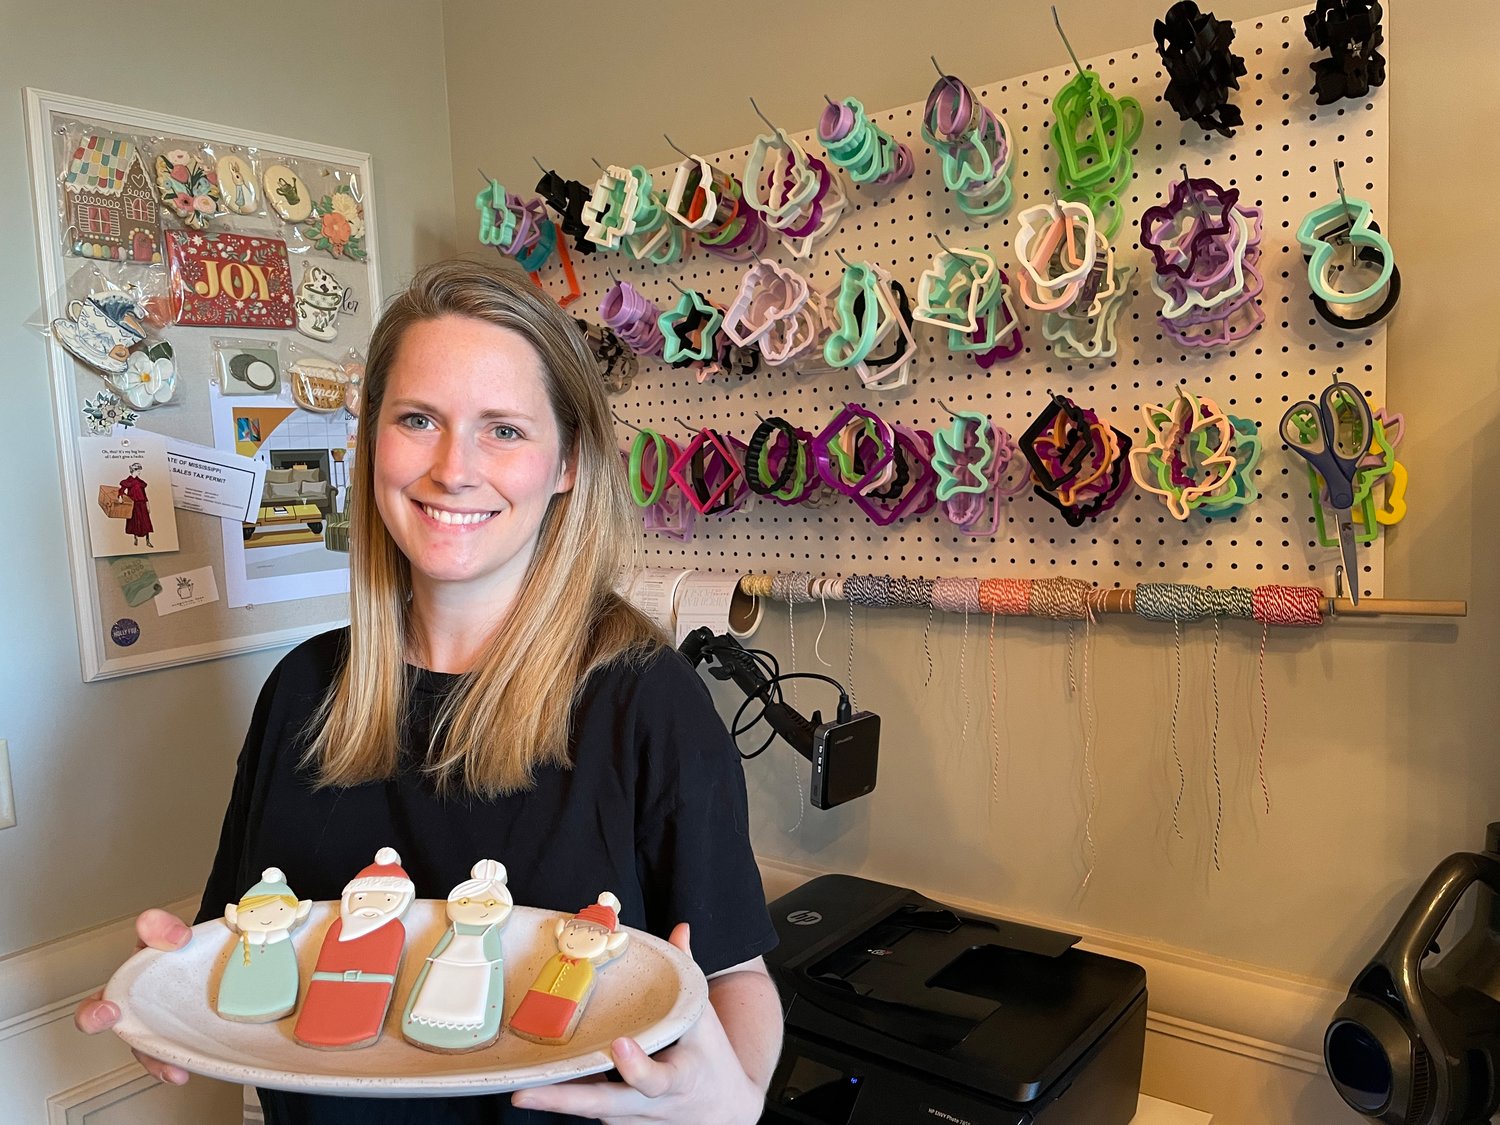 Anna Smithhart has been running a small baking operation out of her Madison home for the last two years. She owns over 200 different cookie cutters.